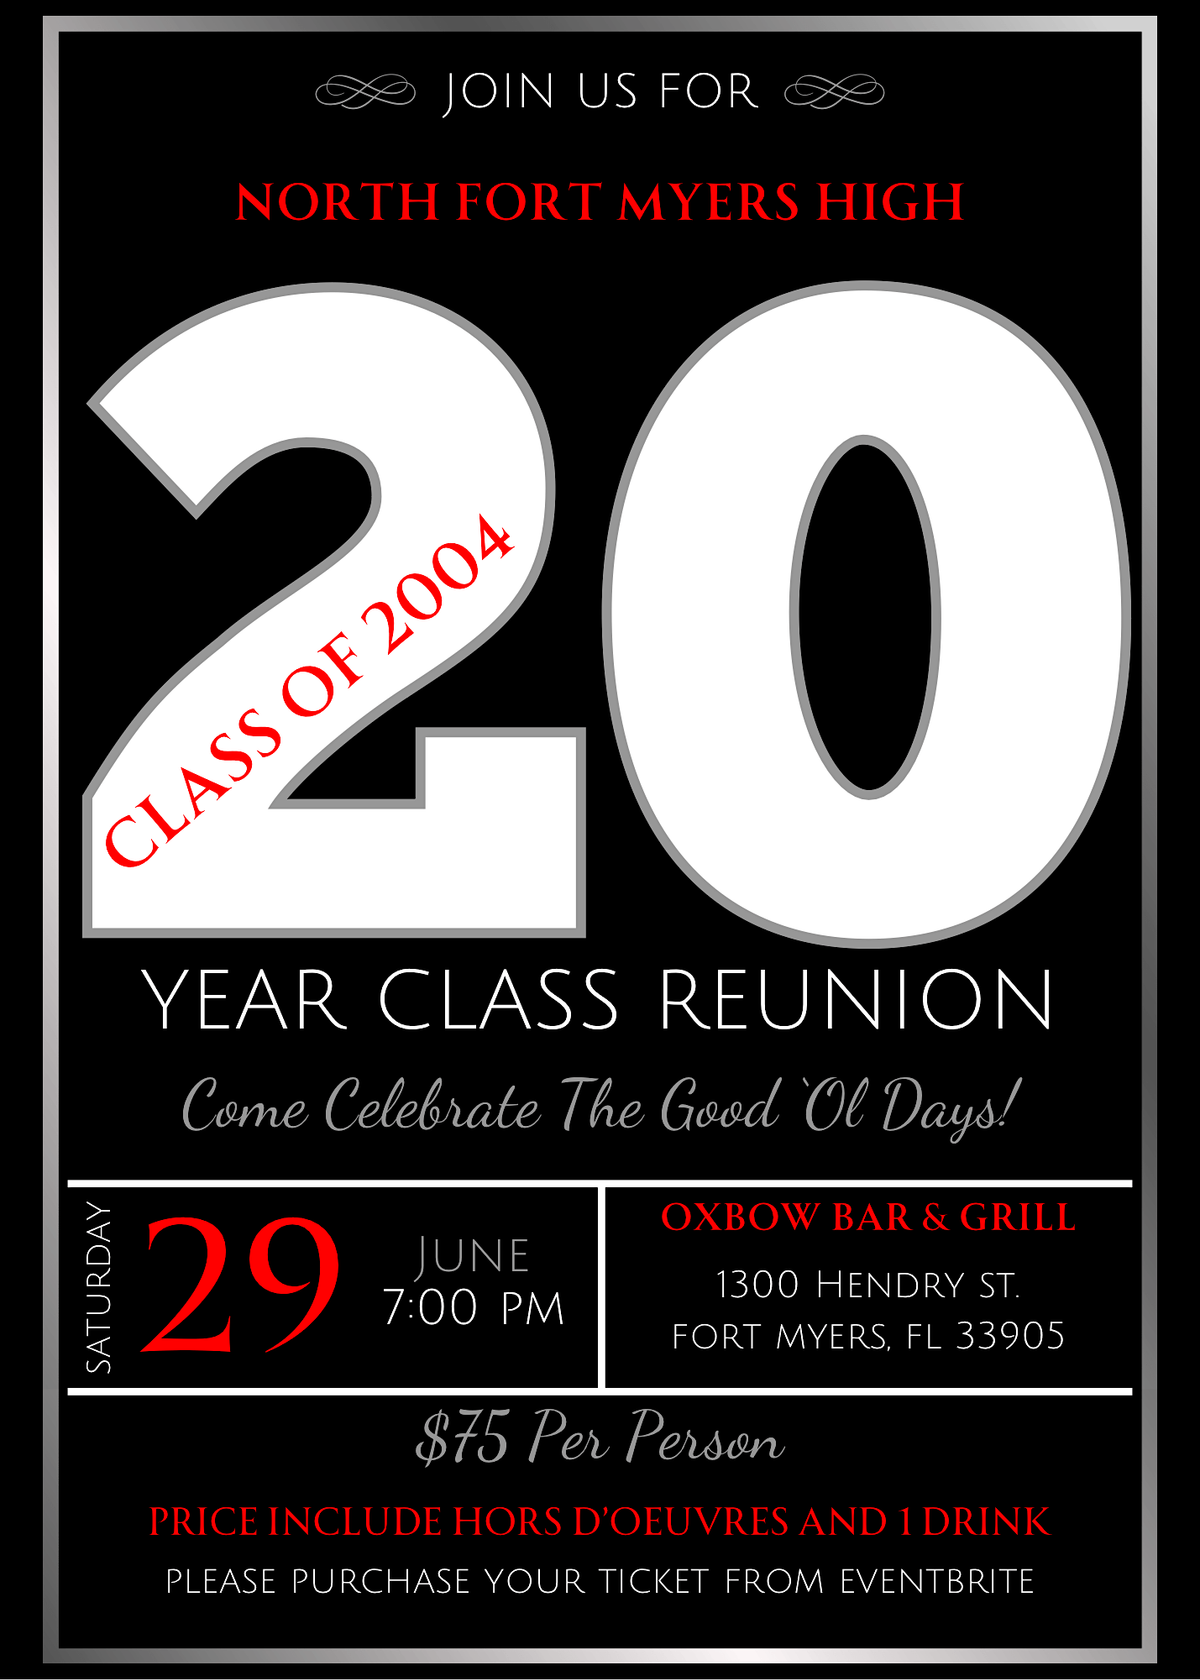 NFMHS  Class of 2004 Reunion